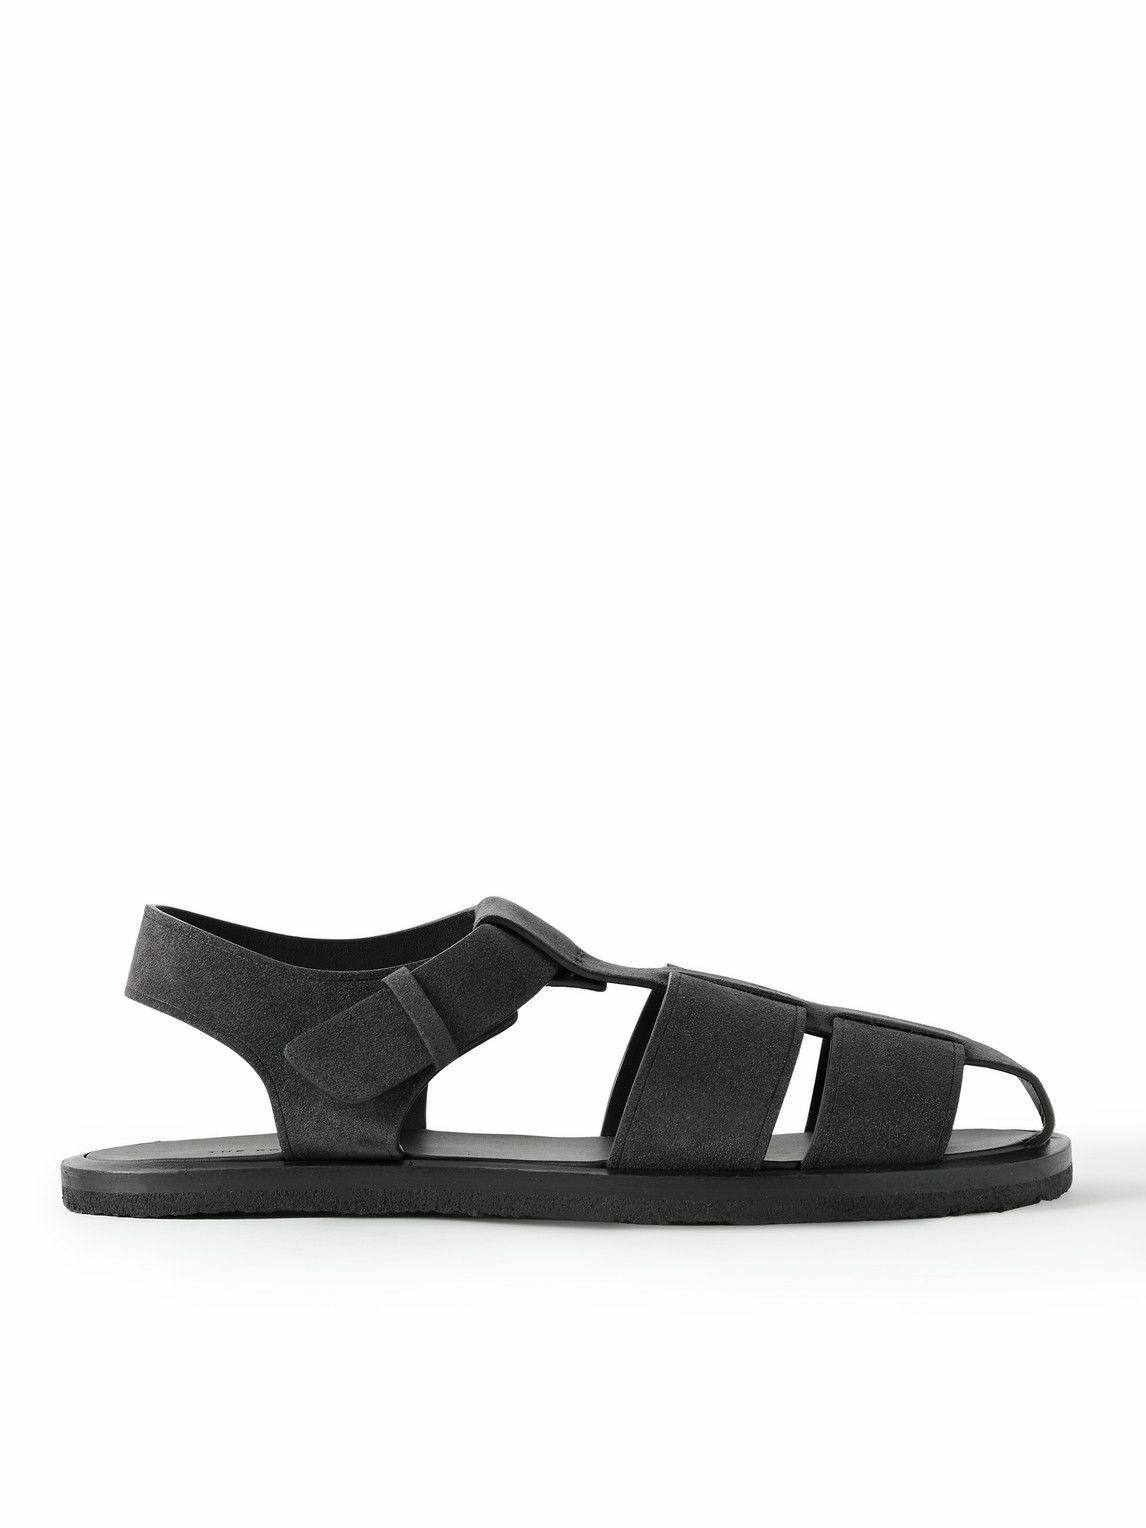 The Row - Fisherman Suede Sandals - Black The Row